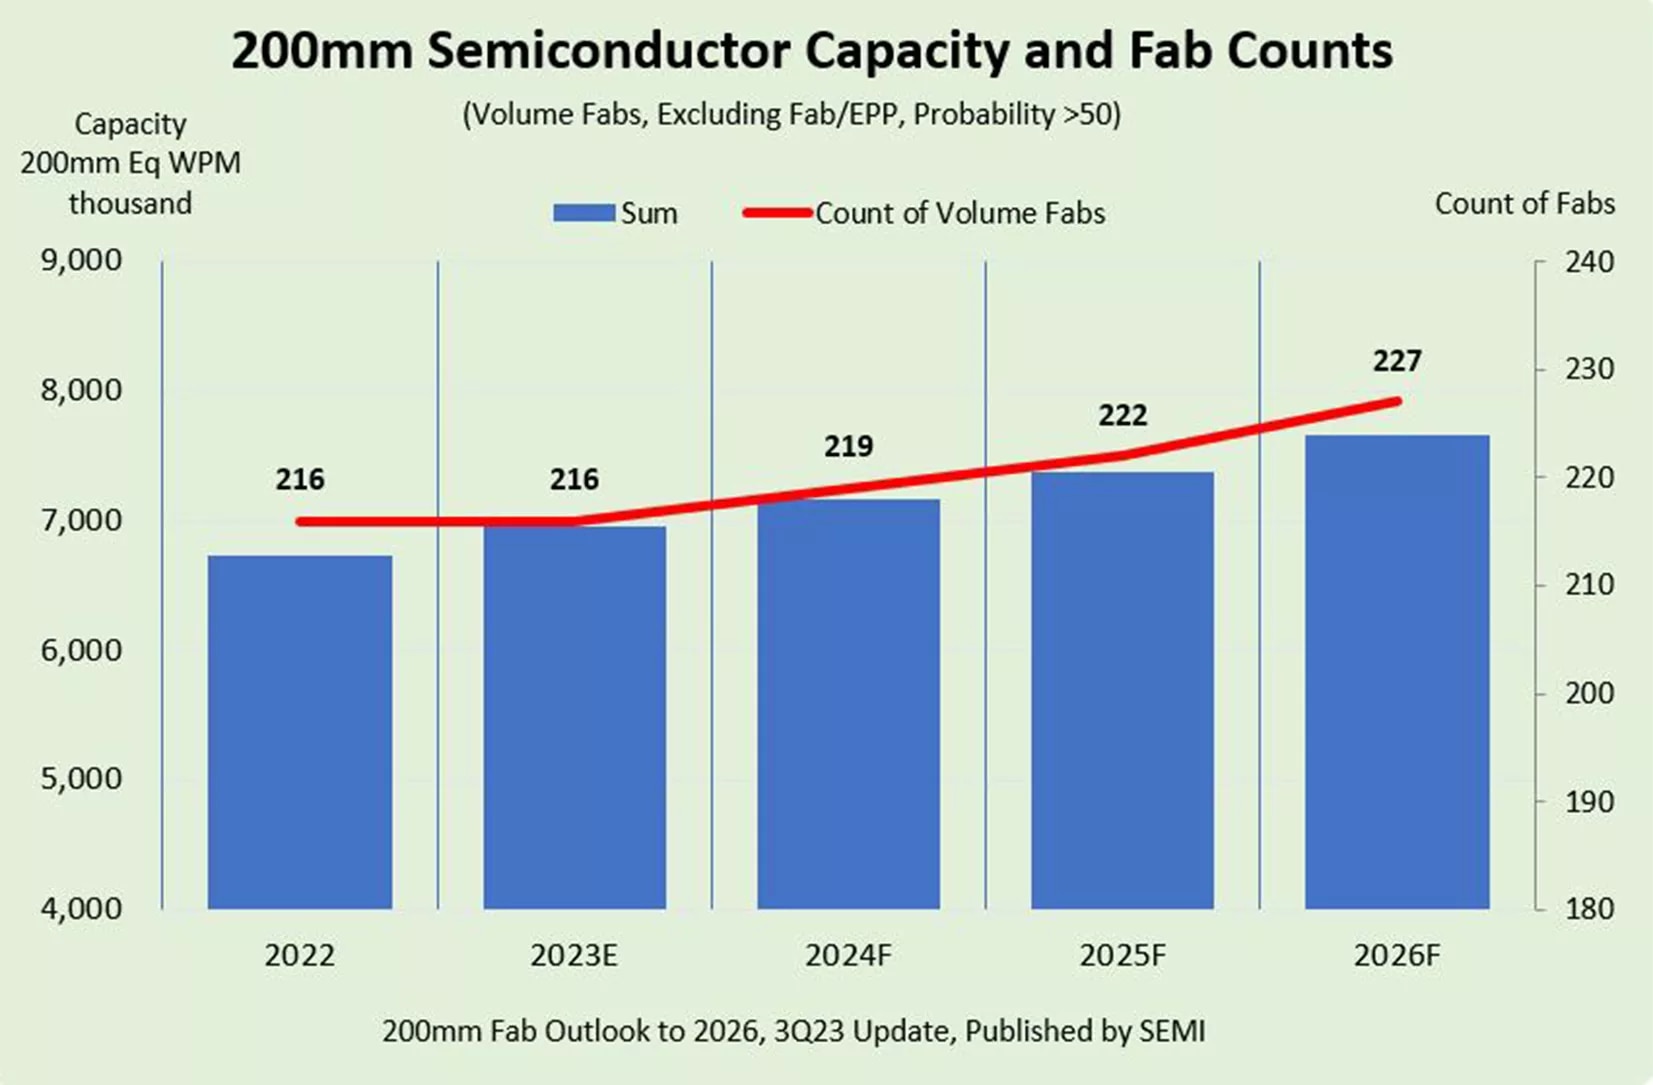 Global 200mm Fab Capacity will Reach an All-time High in 2026